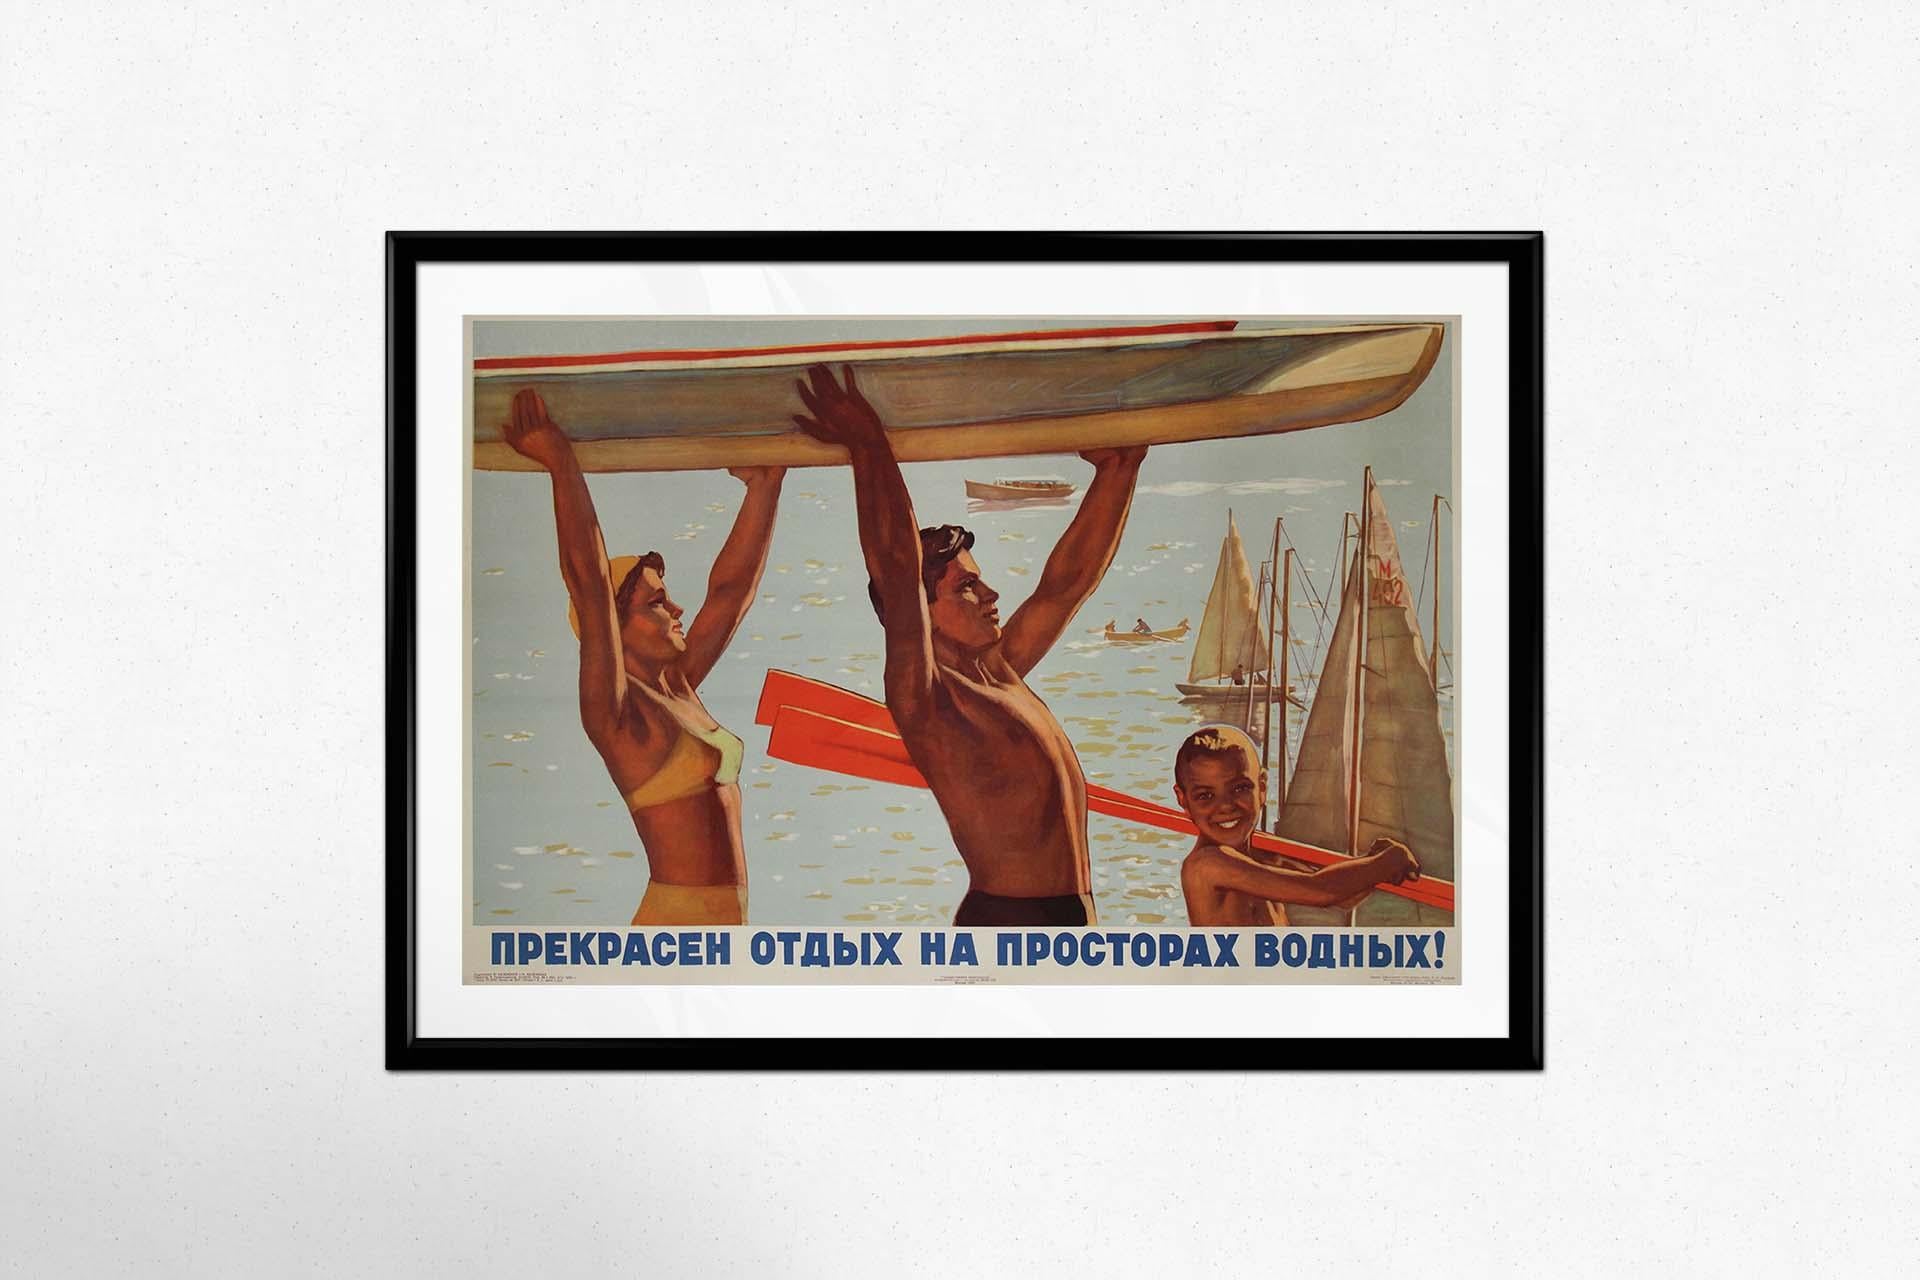 The original Soviet propaganda poster from 1960, created by Kalensky & Kalenskaya, boldly promotes the theme of water activities. This poster, like many others of its time, aimed to reinforce Soviet ideologies and values while encouraging citizen